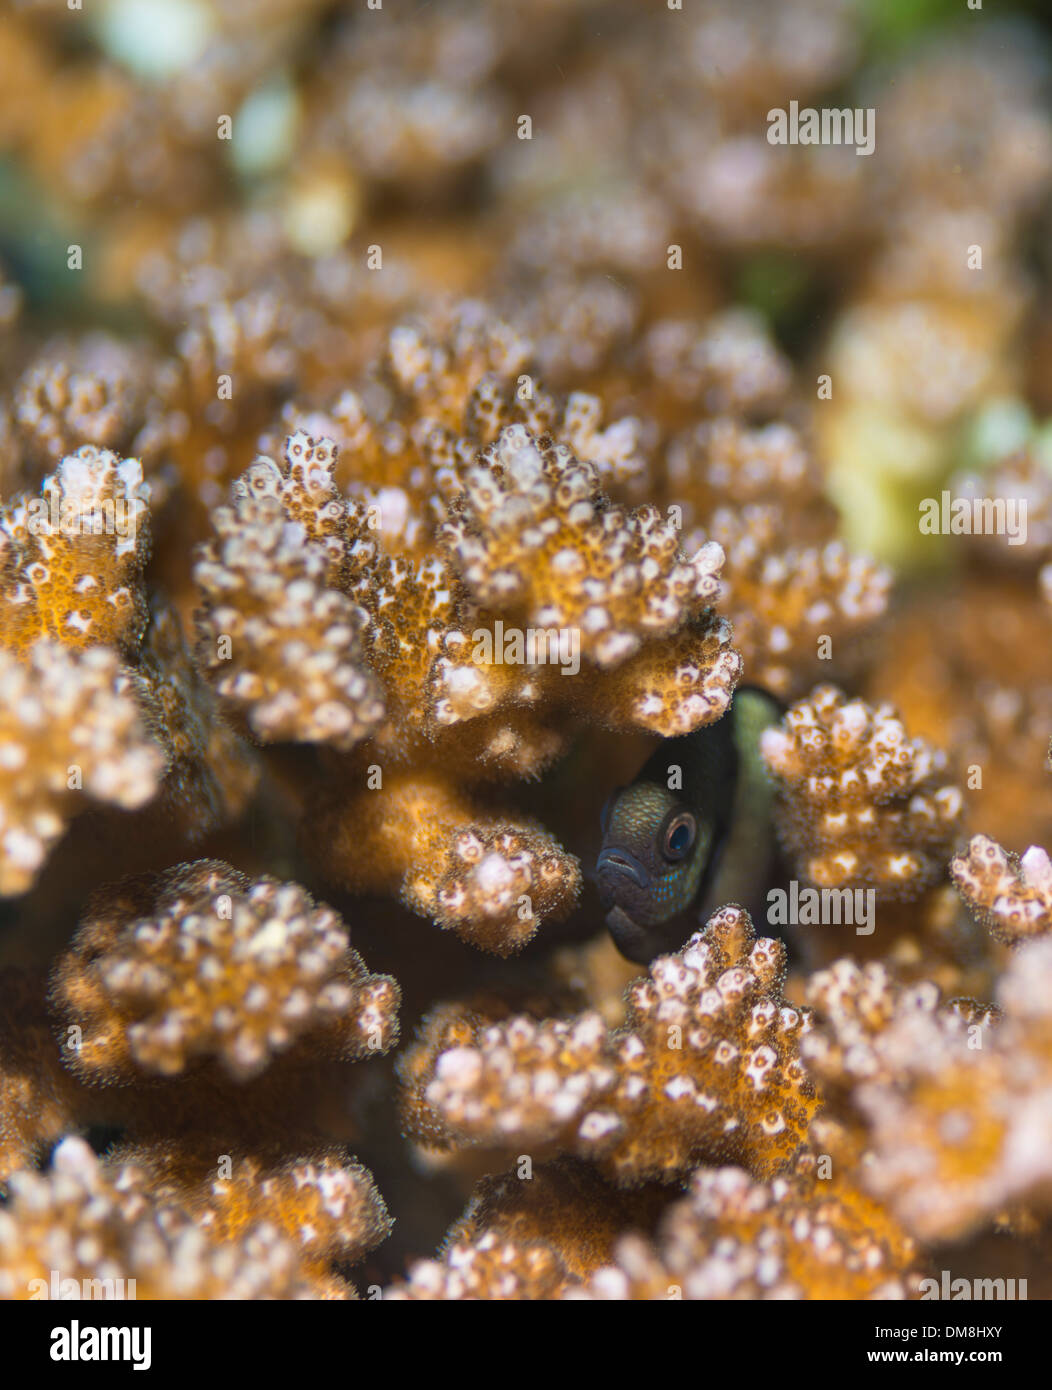 Cardinal fish hiding in a coral Stock Photo